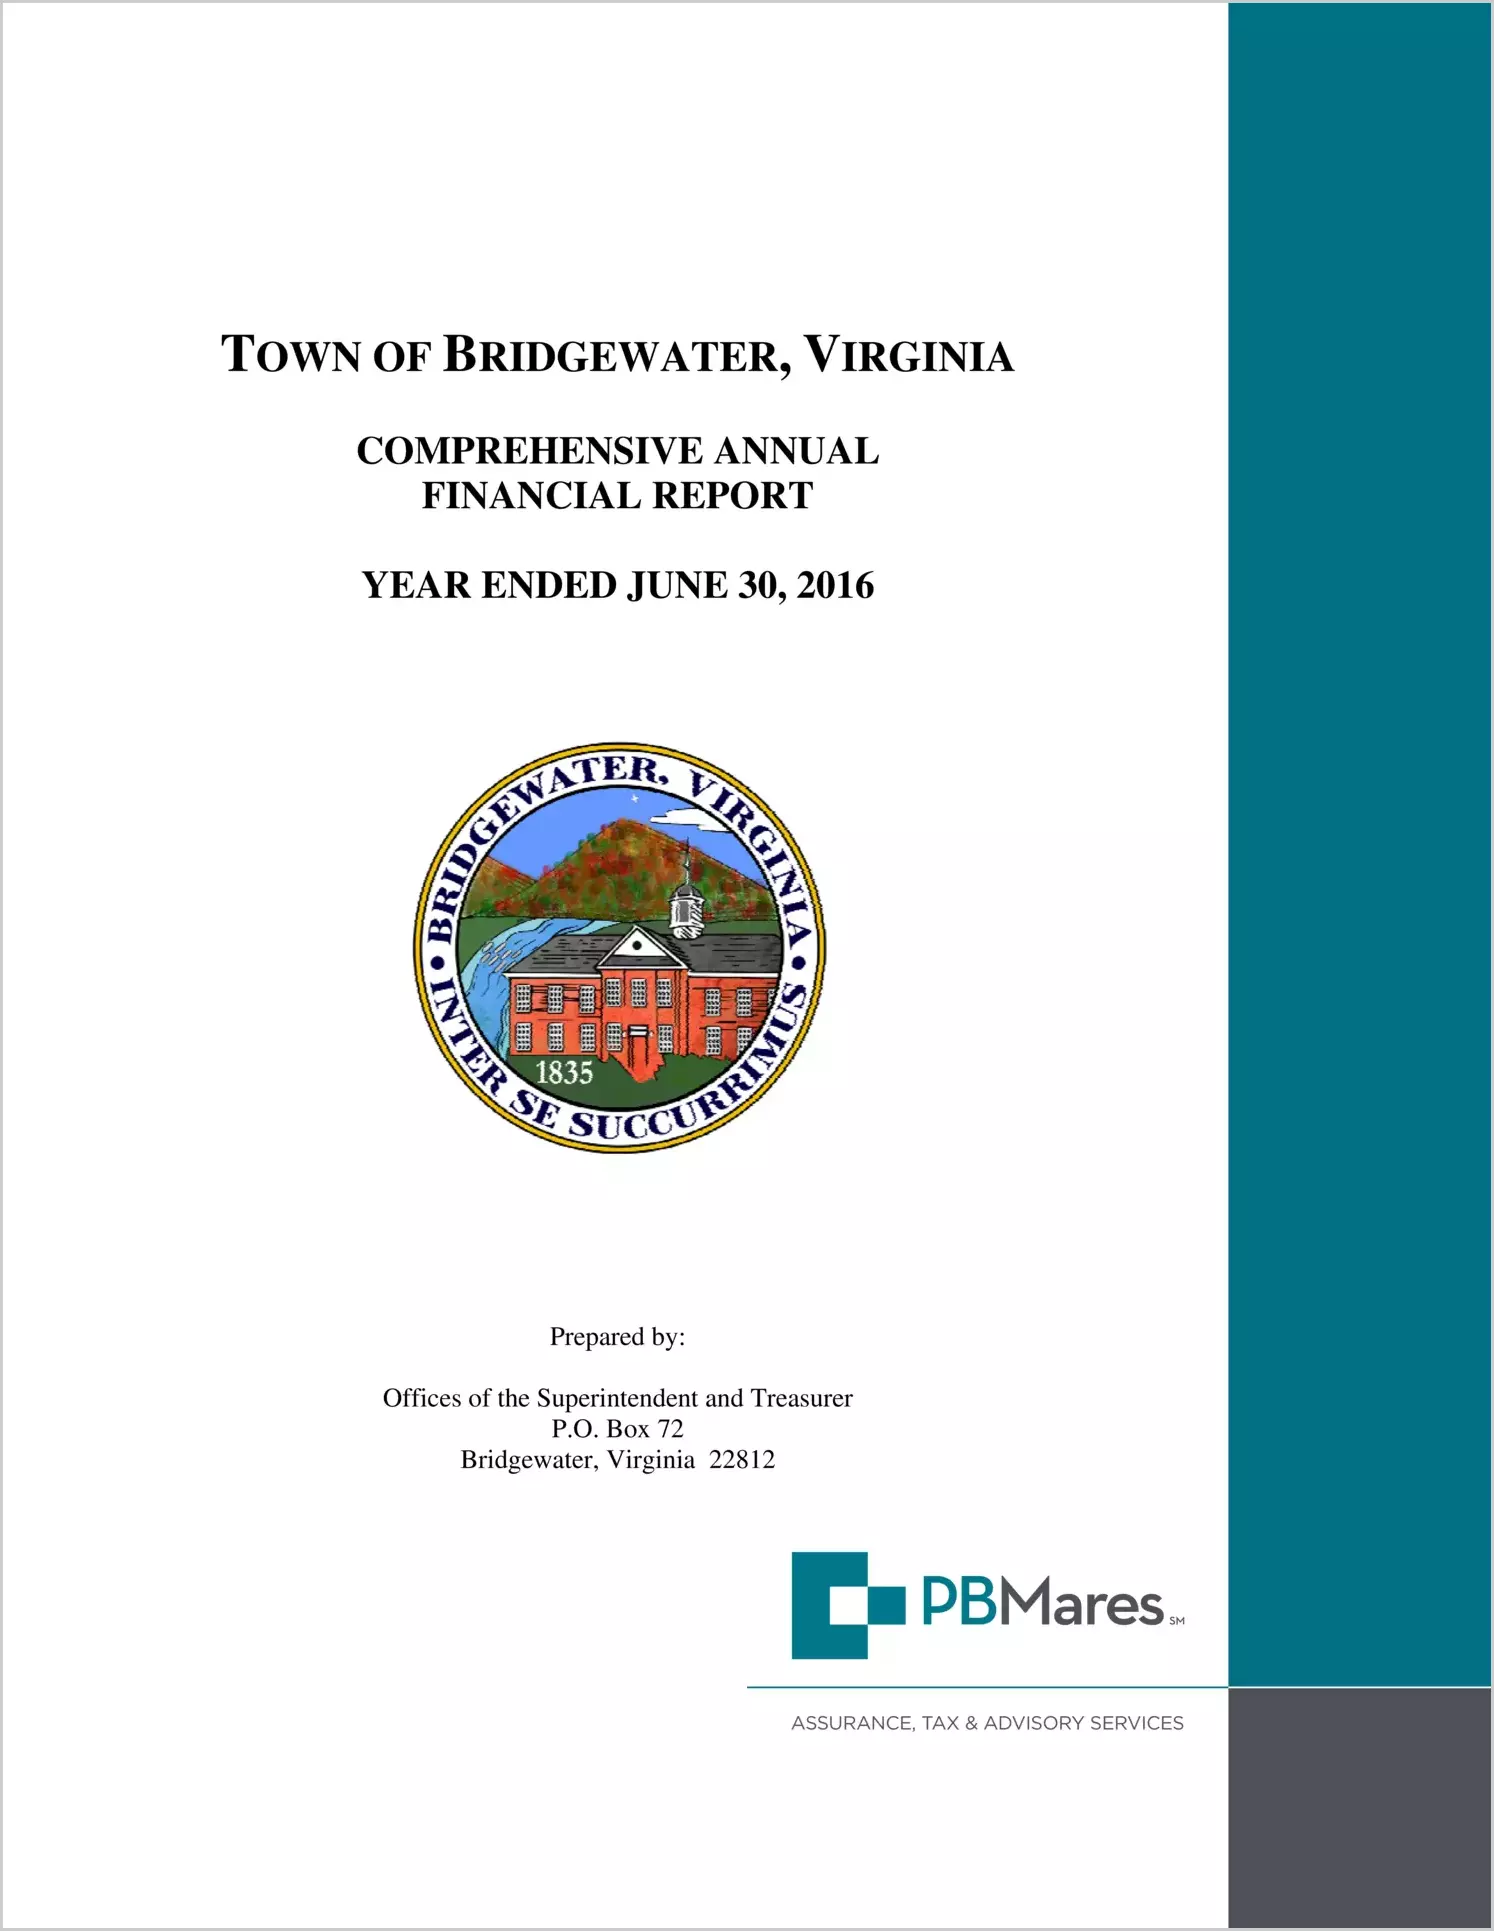 2016 Annual Financial Report for Town of Bridgewater